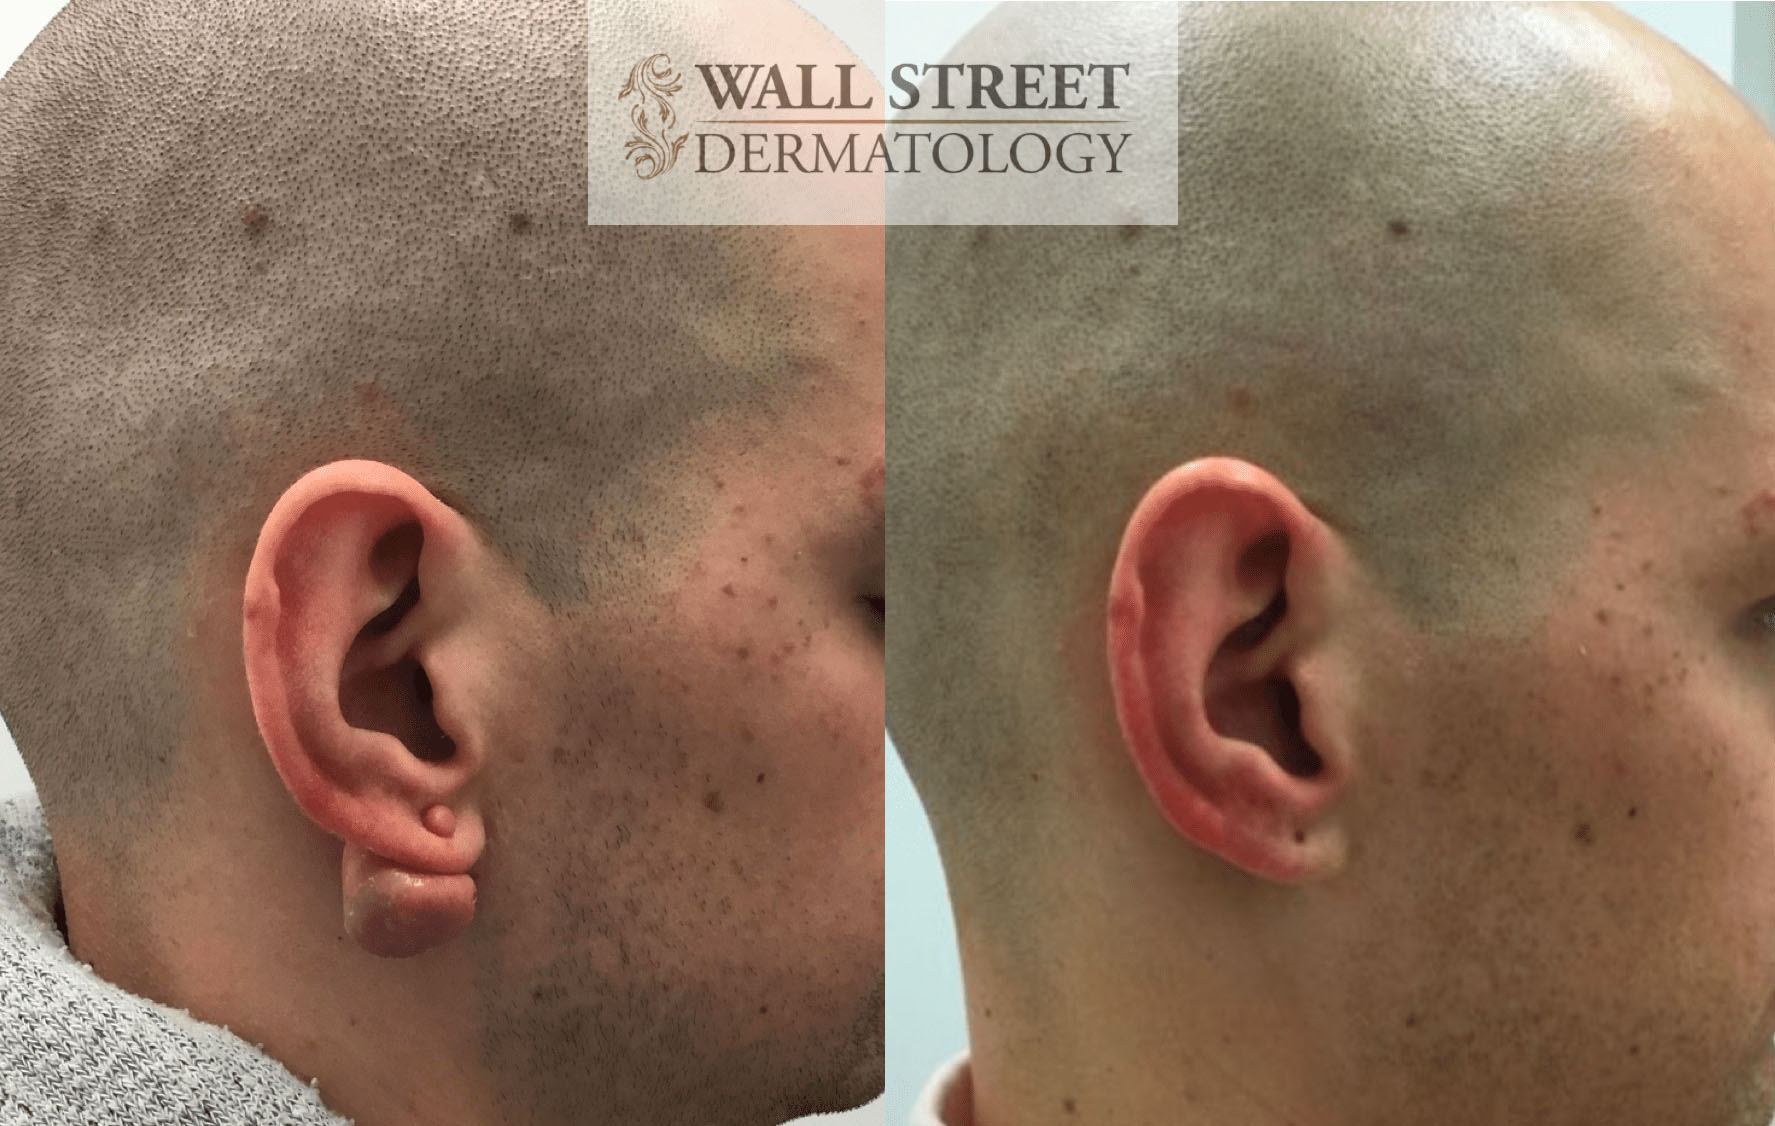 Before & After Gallery Wall Street Dermatology